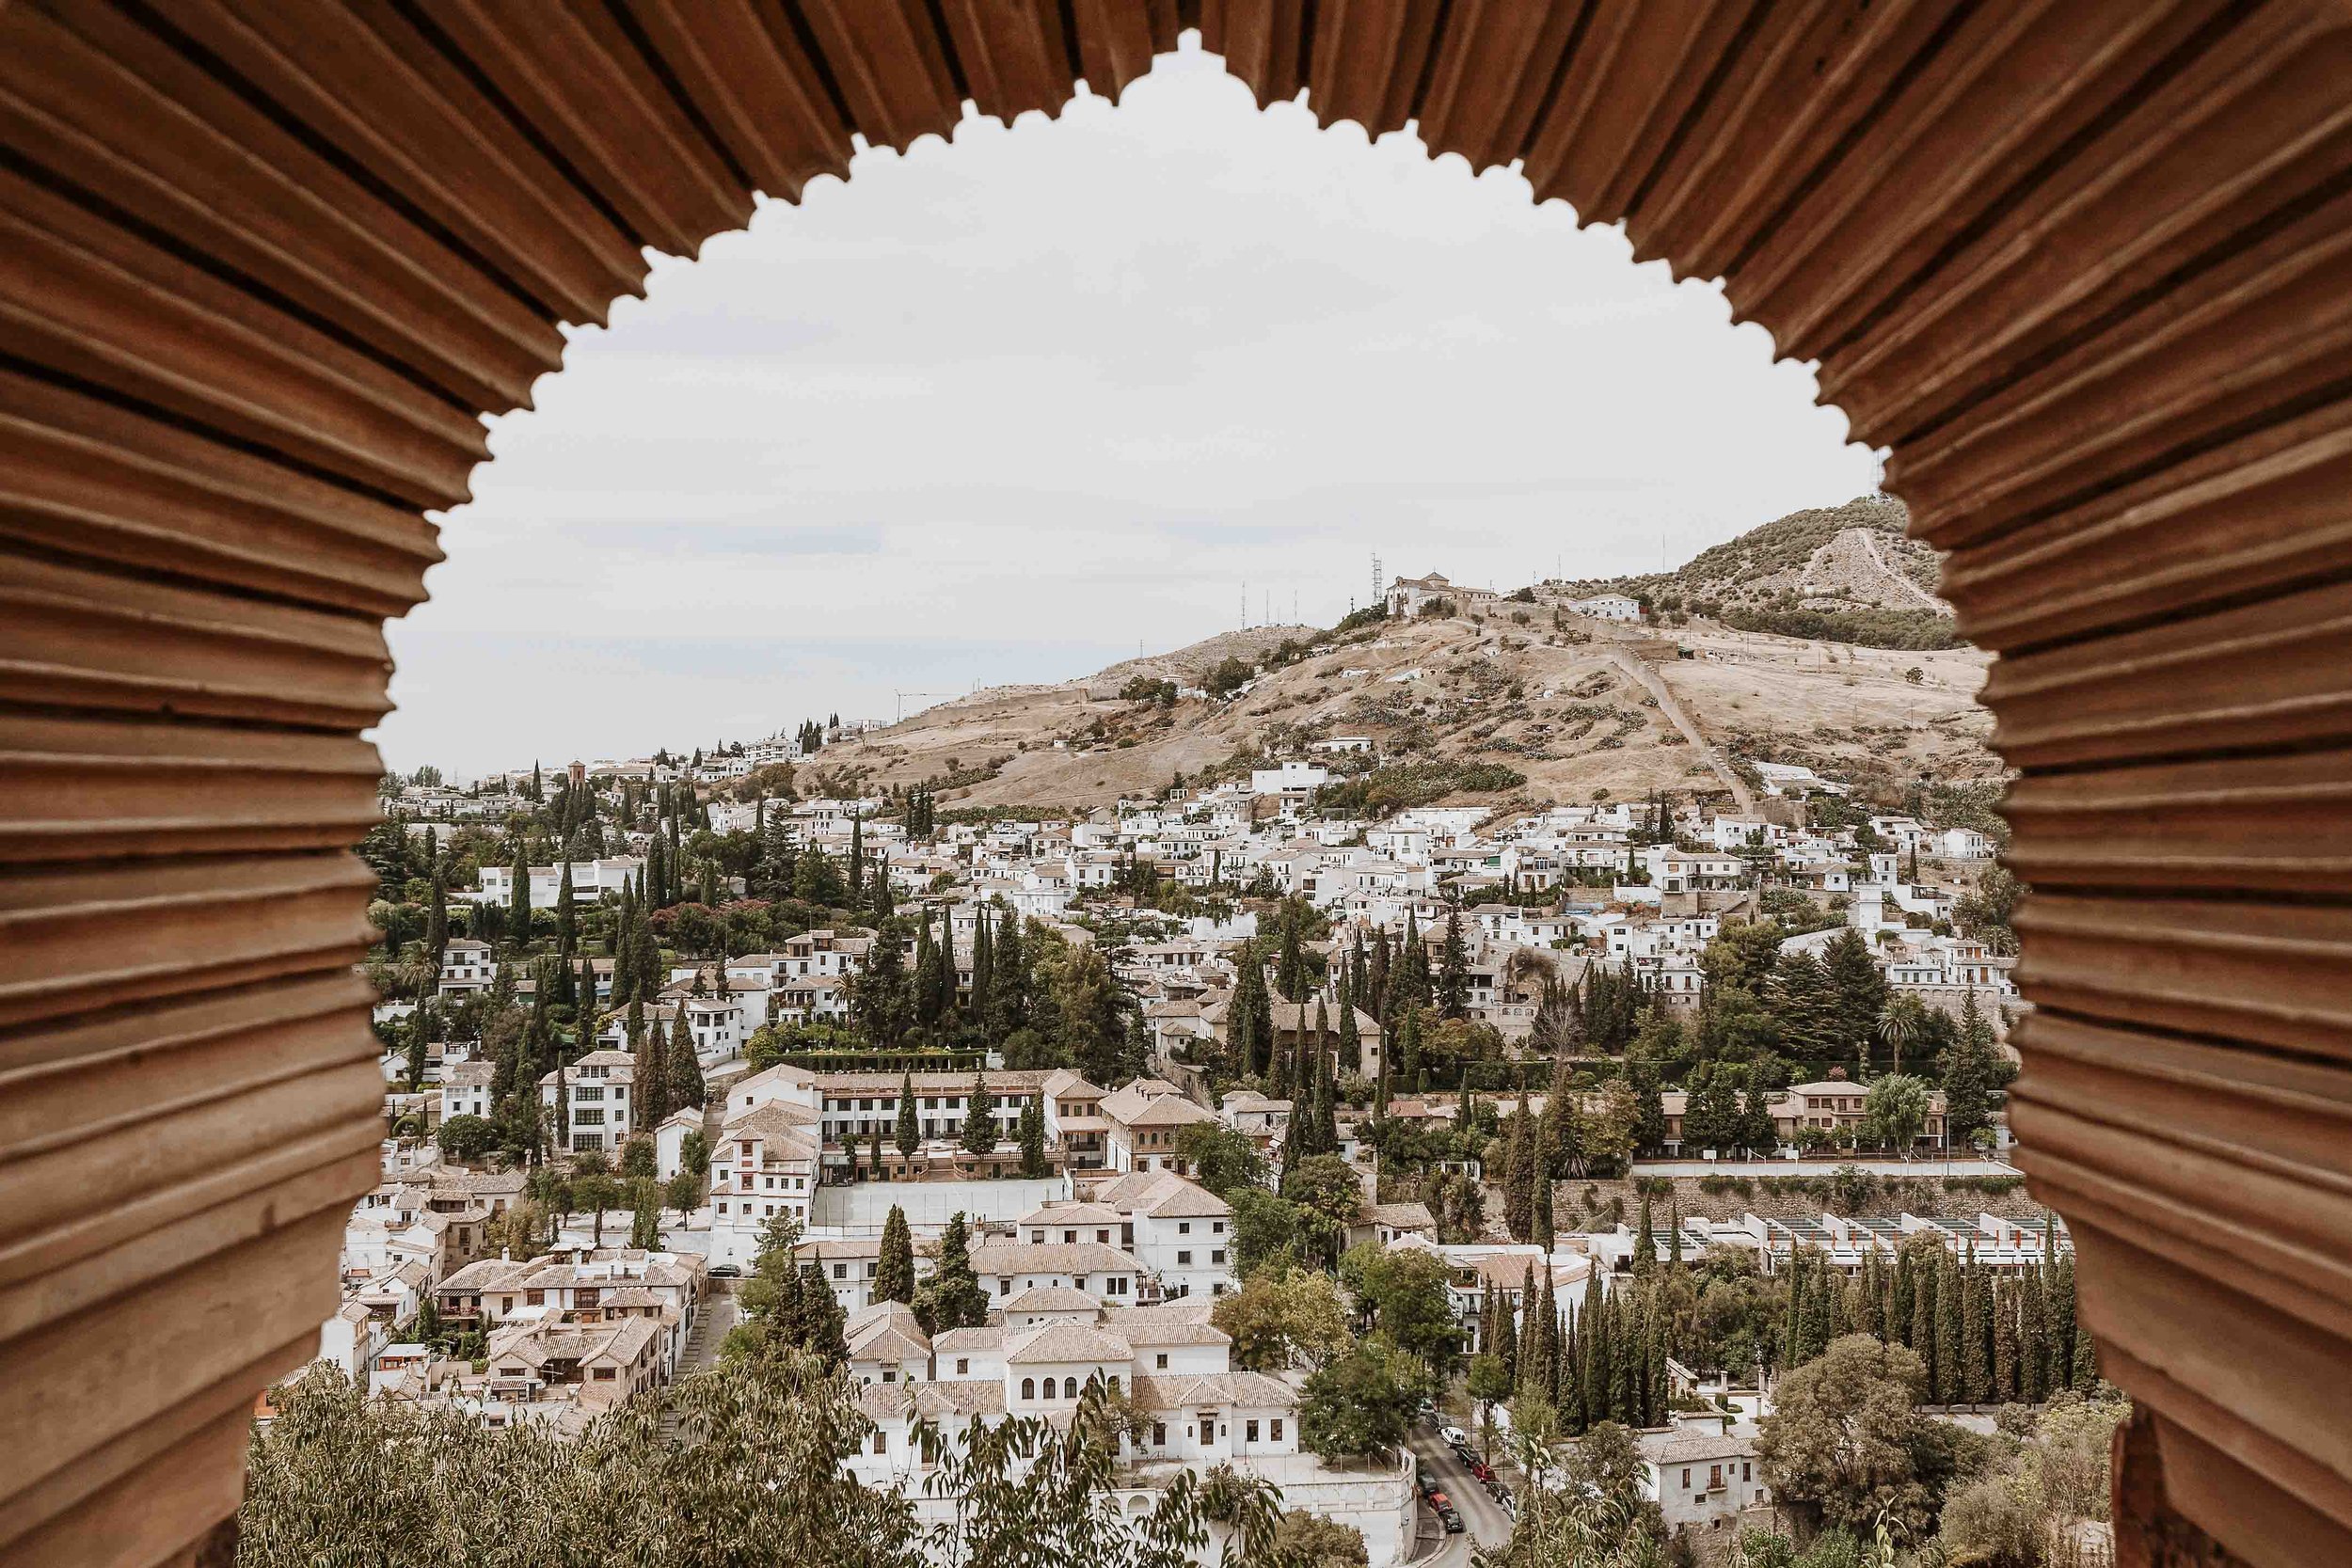 View of Granada from one of the windows of the Alhambra